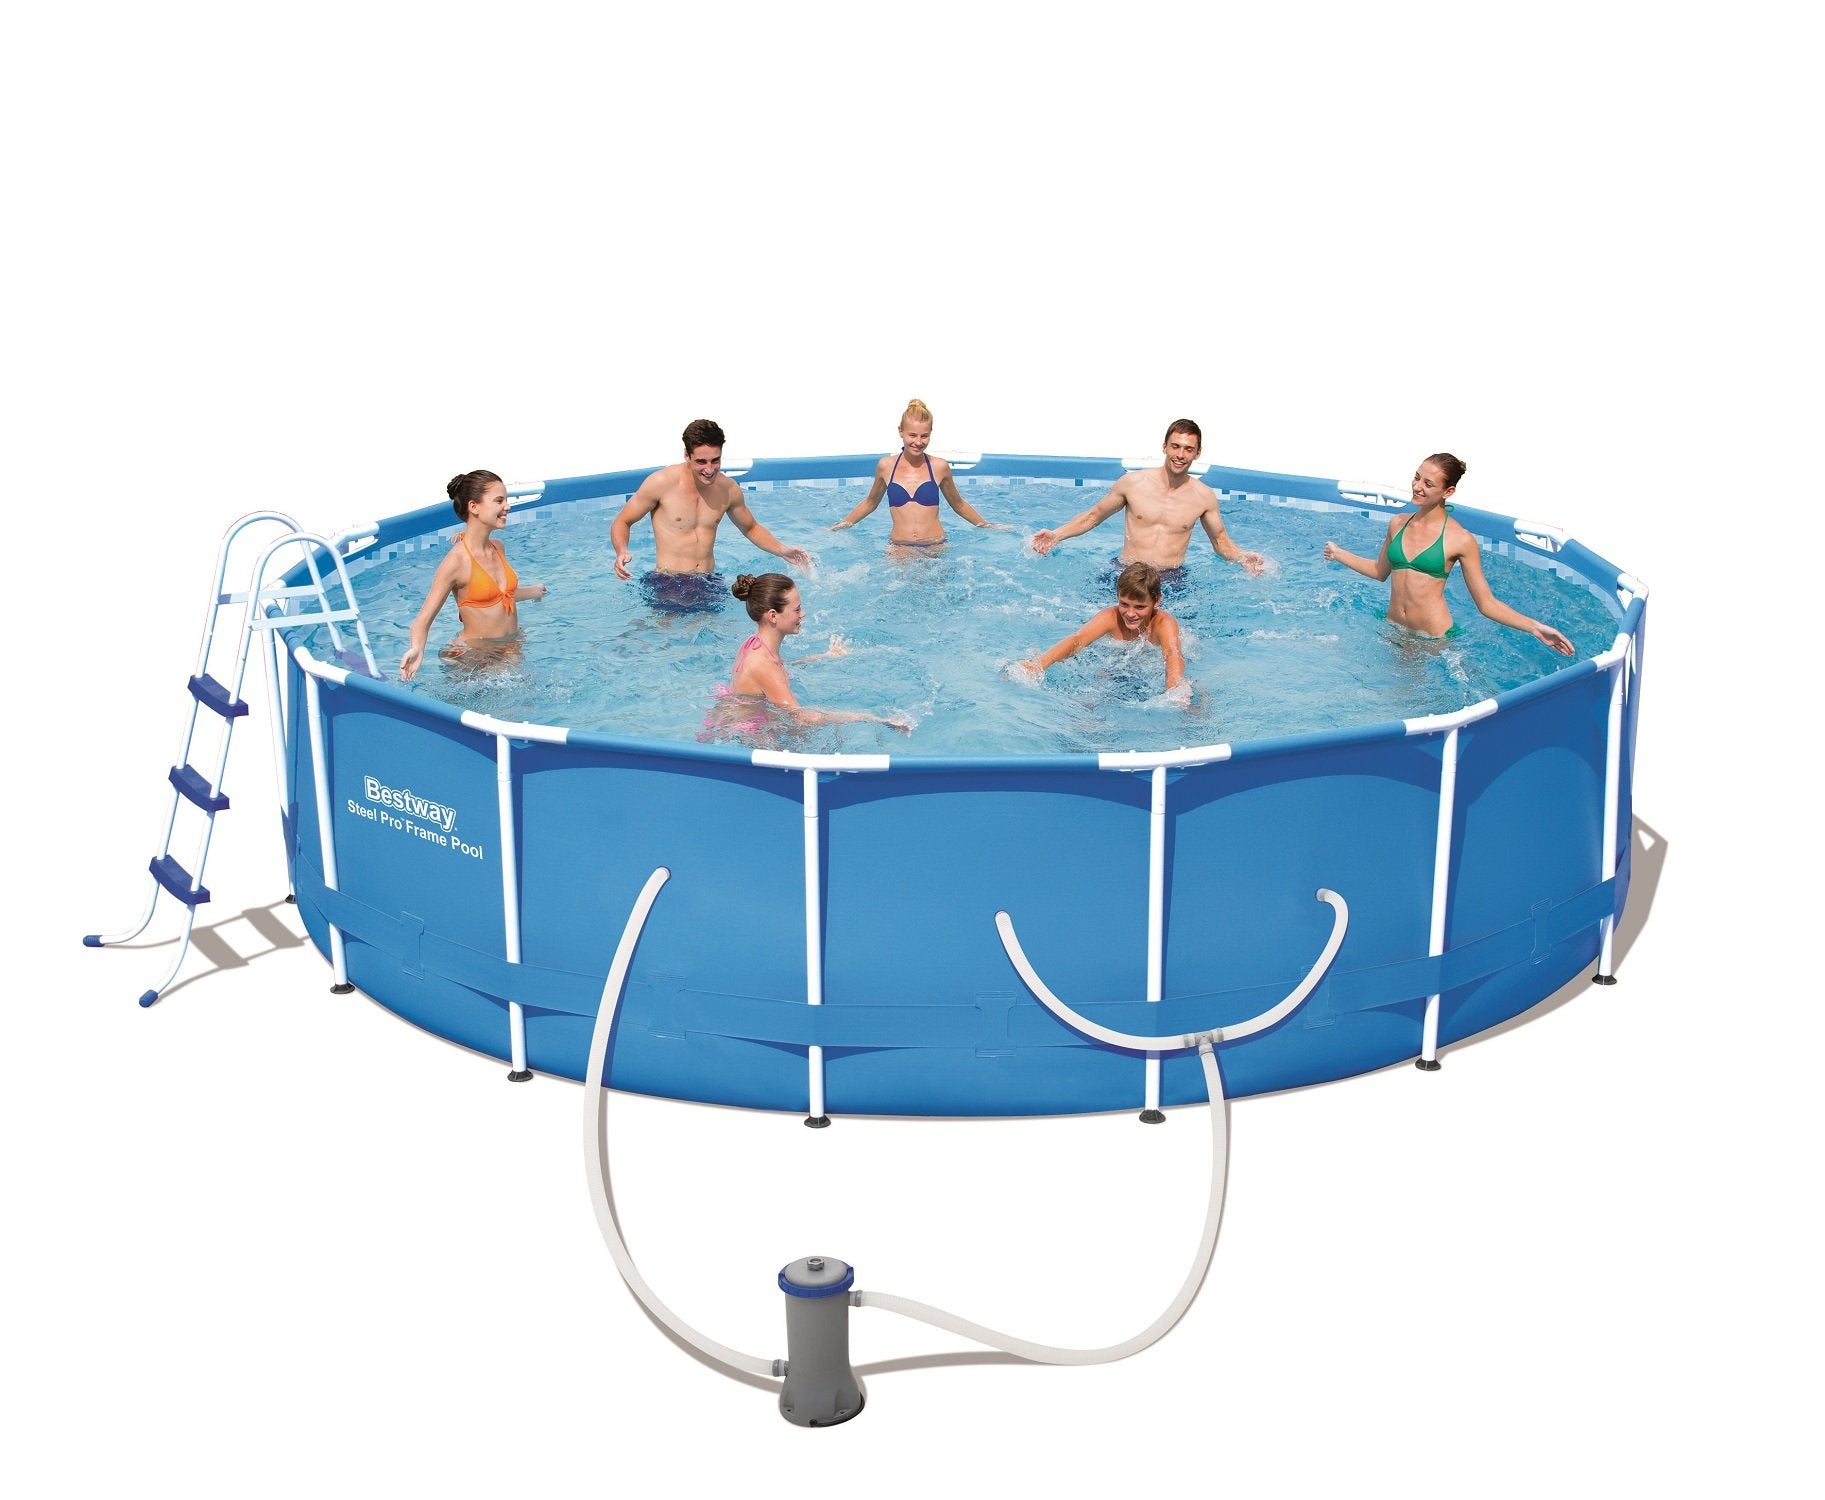 Bestway 56437E Steel Pro, 15ft x 42in, Above Ground Round Frame Pool Set